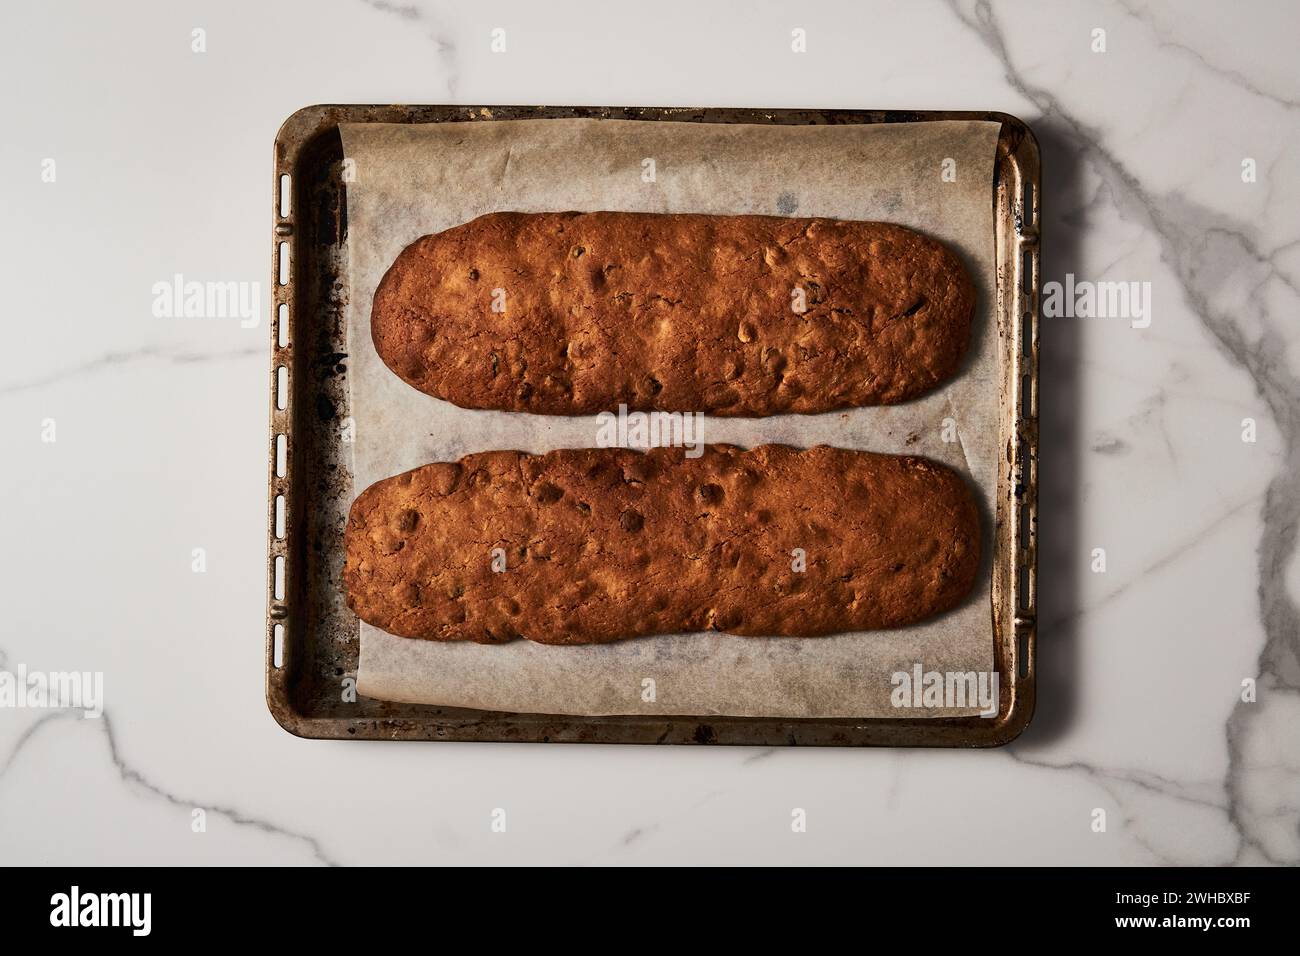 Freshly Baked Almond and Cranberry Biscotti on Parchment-Lined Baking Tray, Overhead Marble View Stock Photo